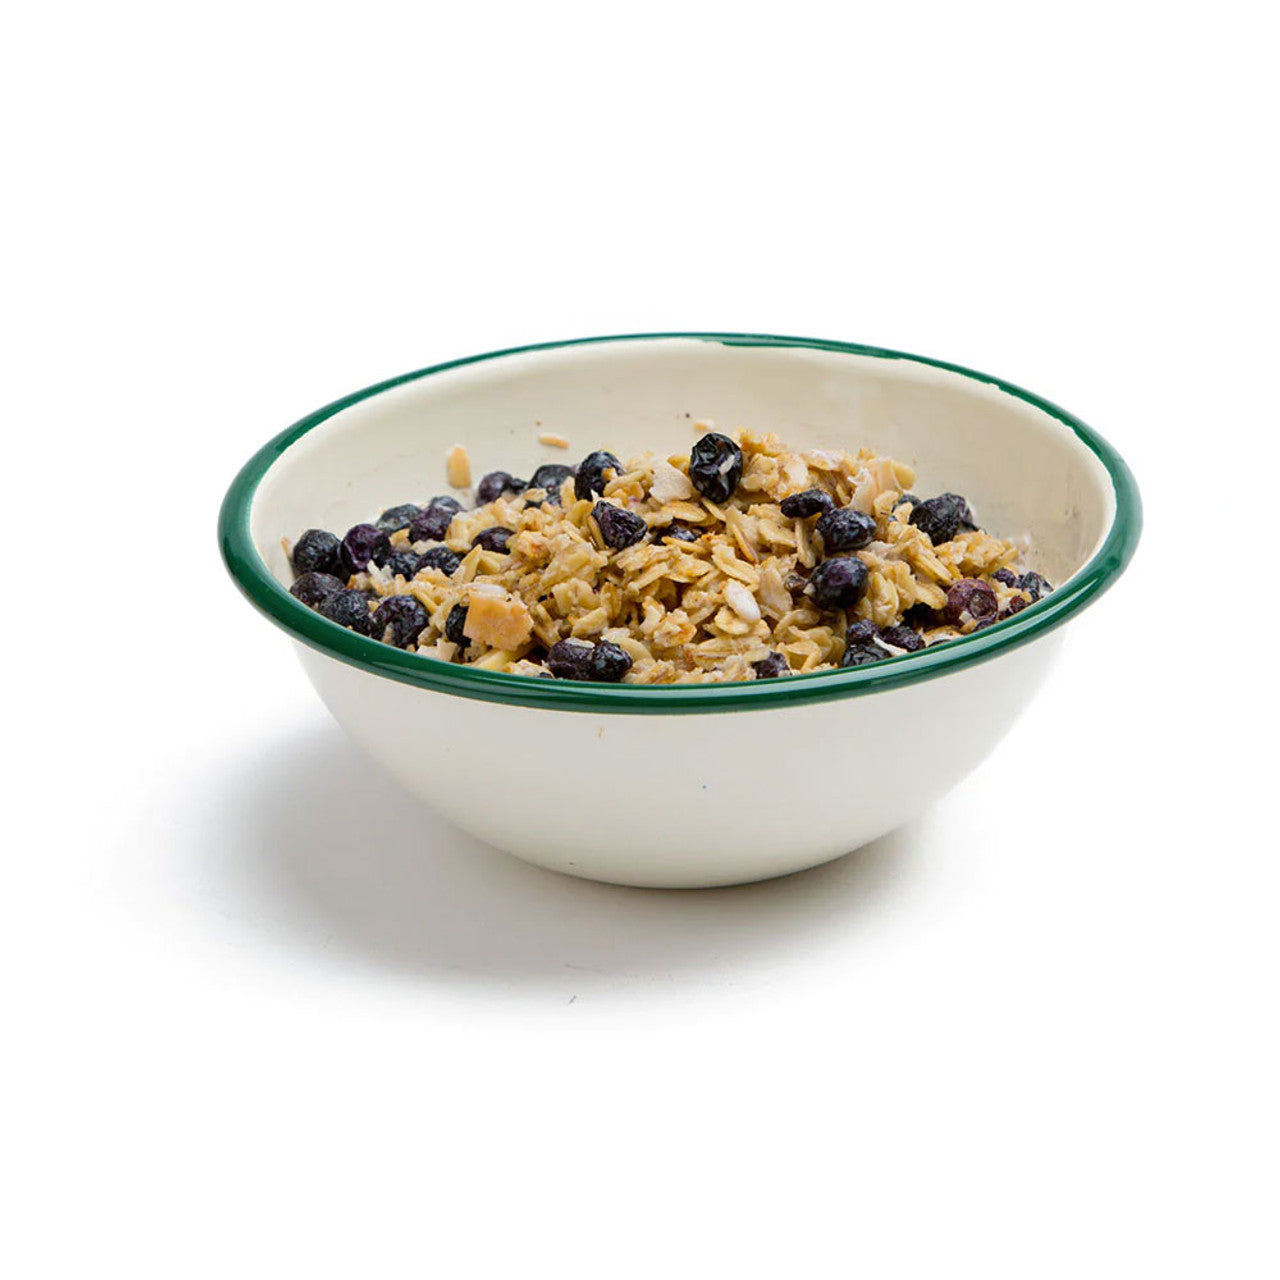 Backpackers Pantry - Granola w/ Blueberry, Milk and Almonds